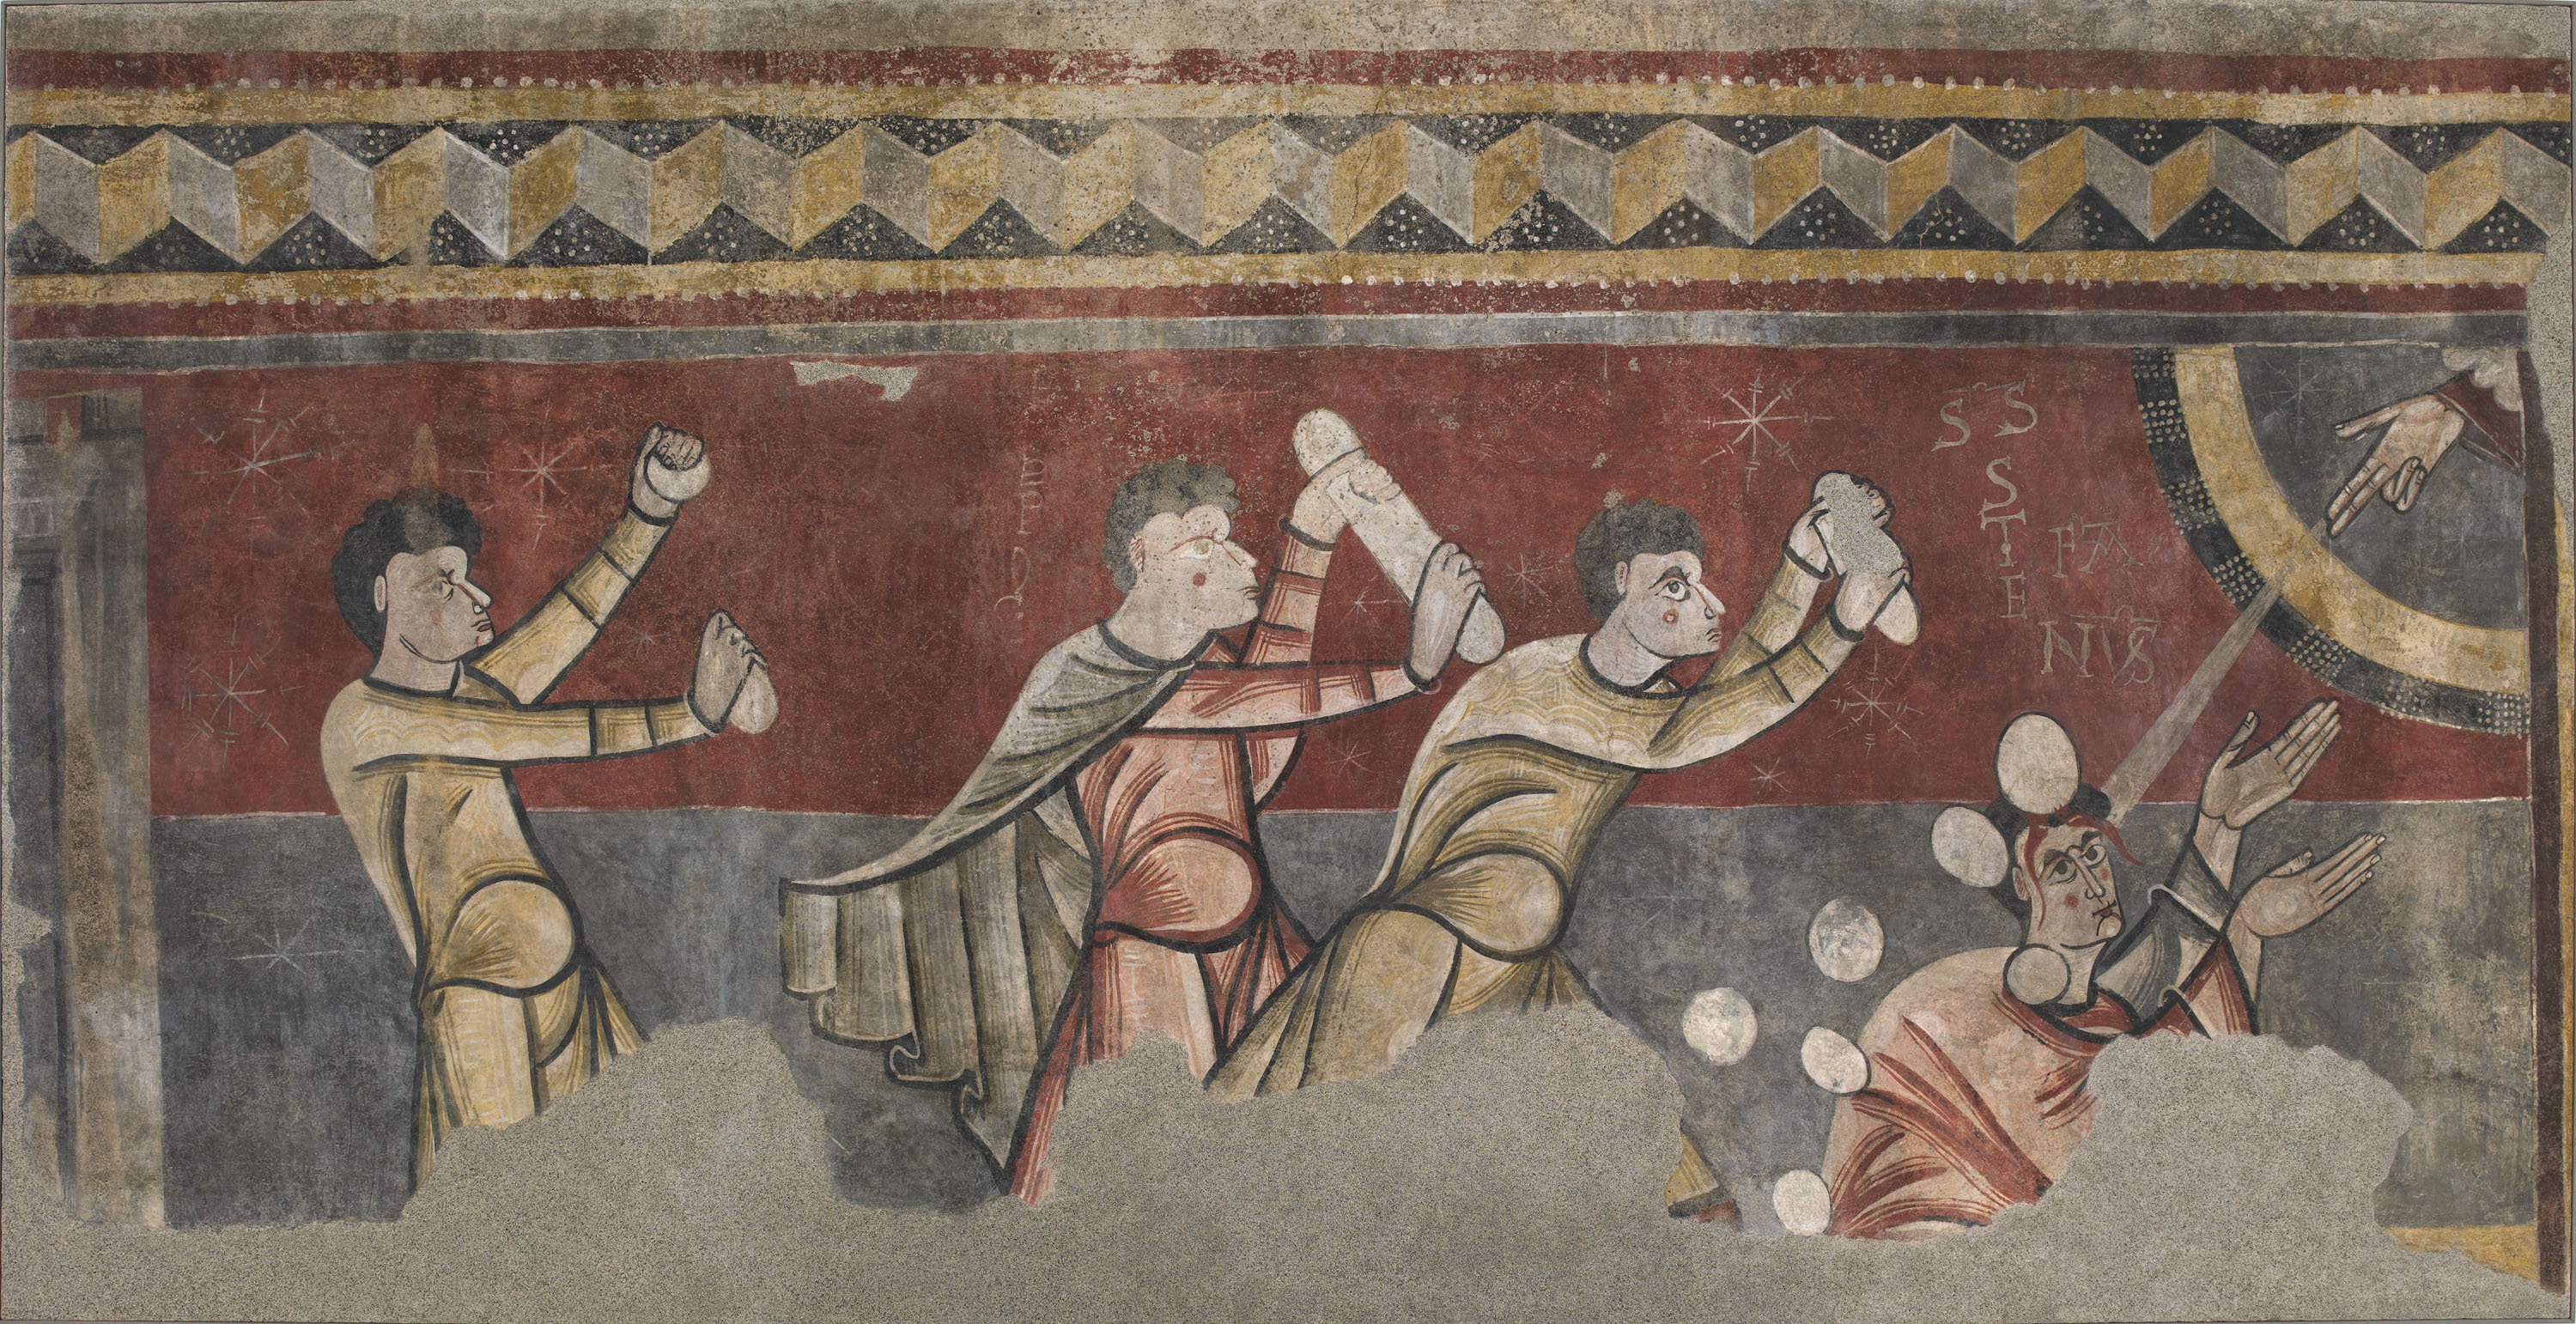 Romanesque wall painting